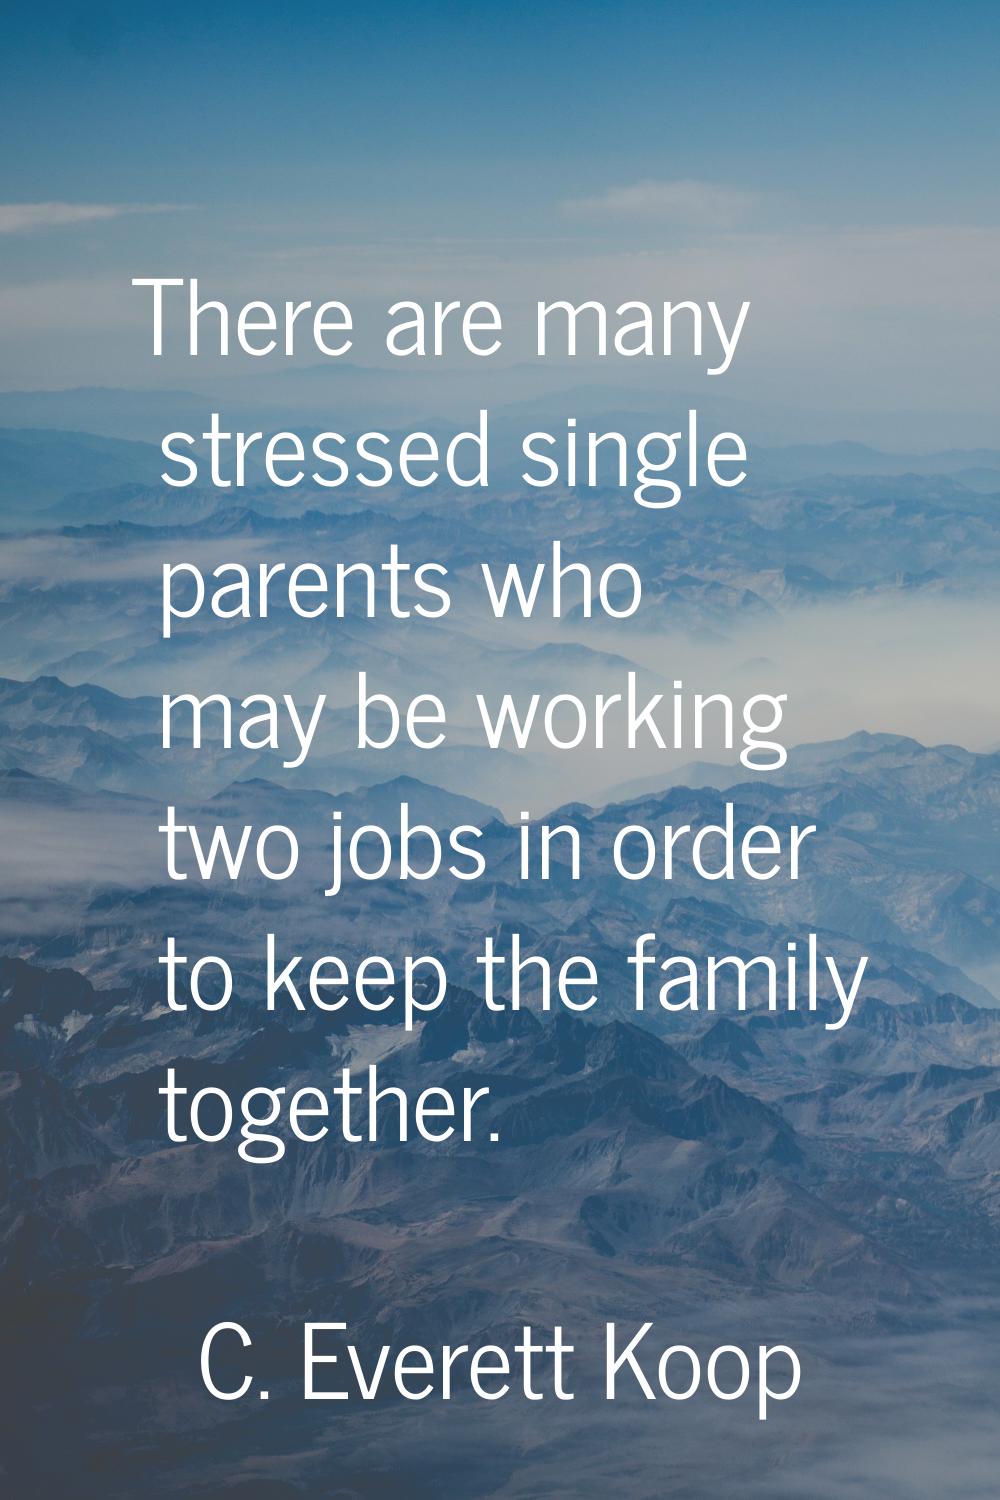 There are many stressed single parents who may be working two jobs in order to keep the family toge